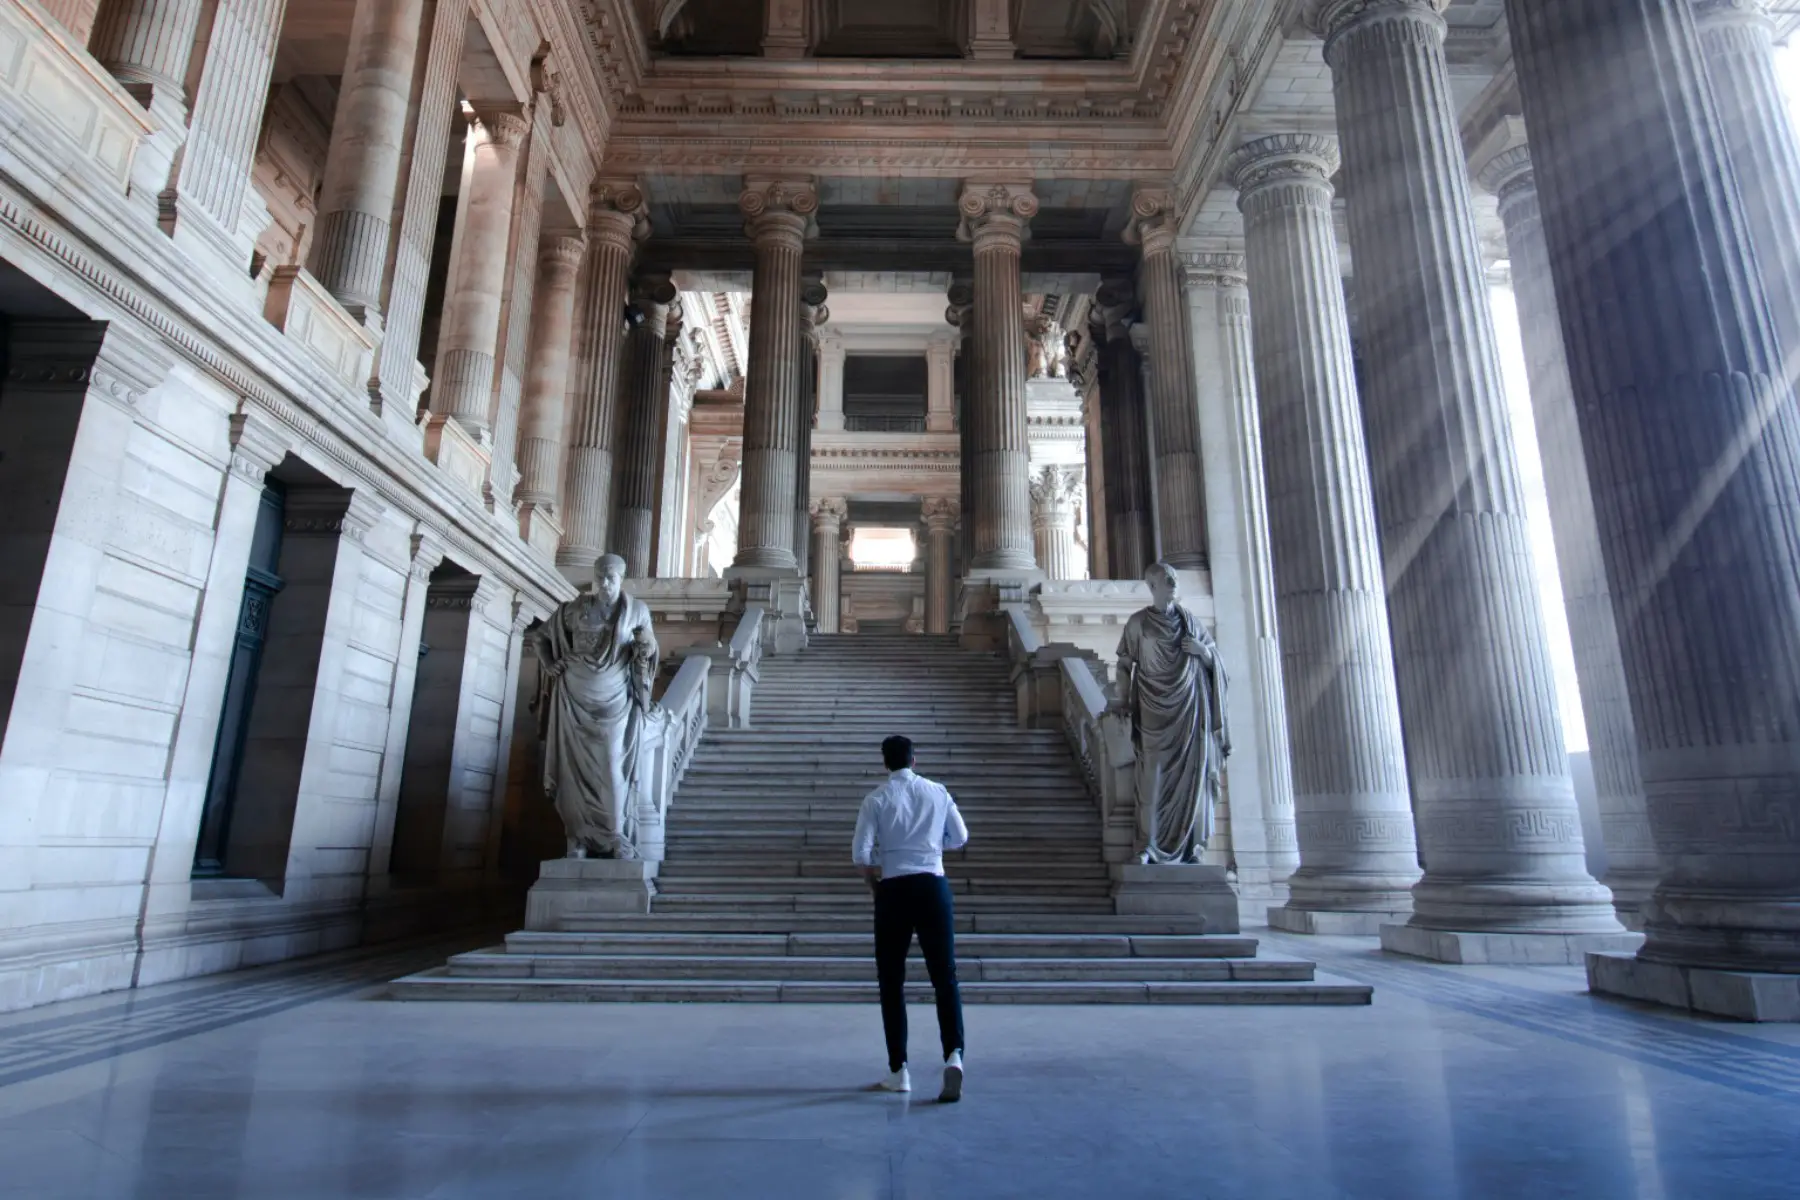 Would-be-citizen walking towards the steps inside the Palace of Justice, Brussels, Belgium.